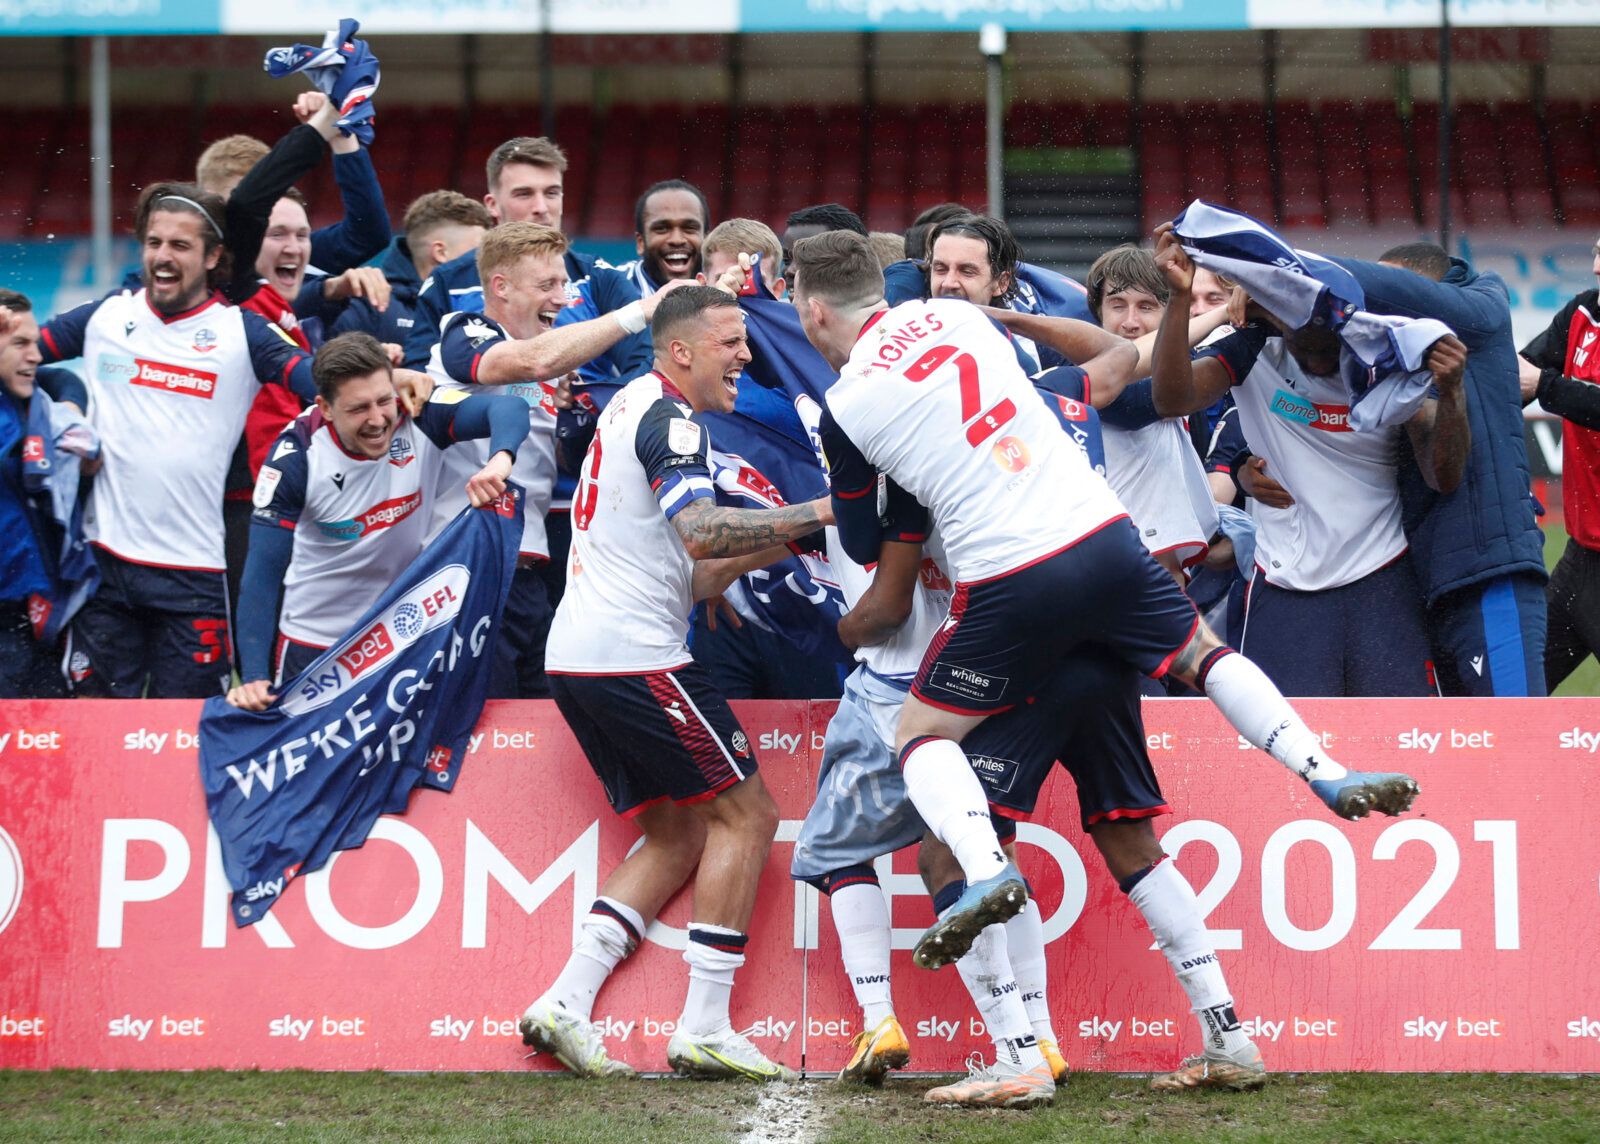 Soccer Football - League Two - Crawley Town v Bolton Wanderers- The People's Pension Stadium, Crawley, Britain - May 8, 2021  Bolton Wanderers players celebrate promotion to League One after the match Action Images/Matthew Childs EDITORIAL USE ONLY. No use with unauthorized audio, video, data, fixture lists, club/league logos or 'live' services. Online in-match use limited to 75 images, no video emulation. No use in betting, games or single club /league/player publications.  Please contact your 